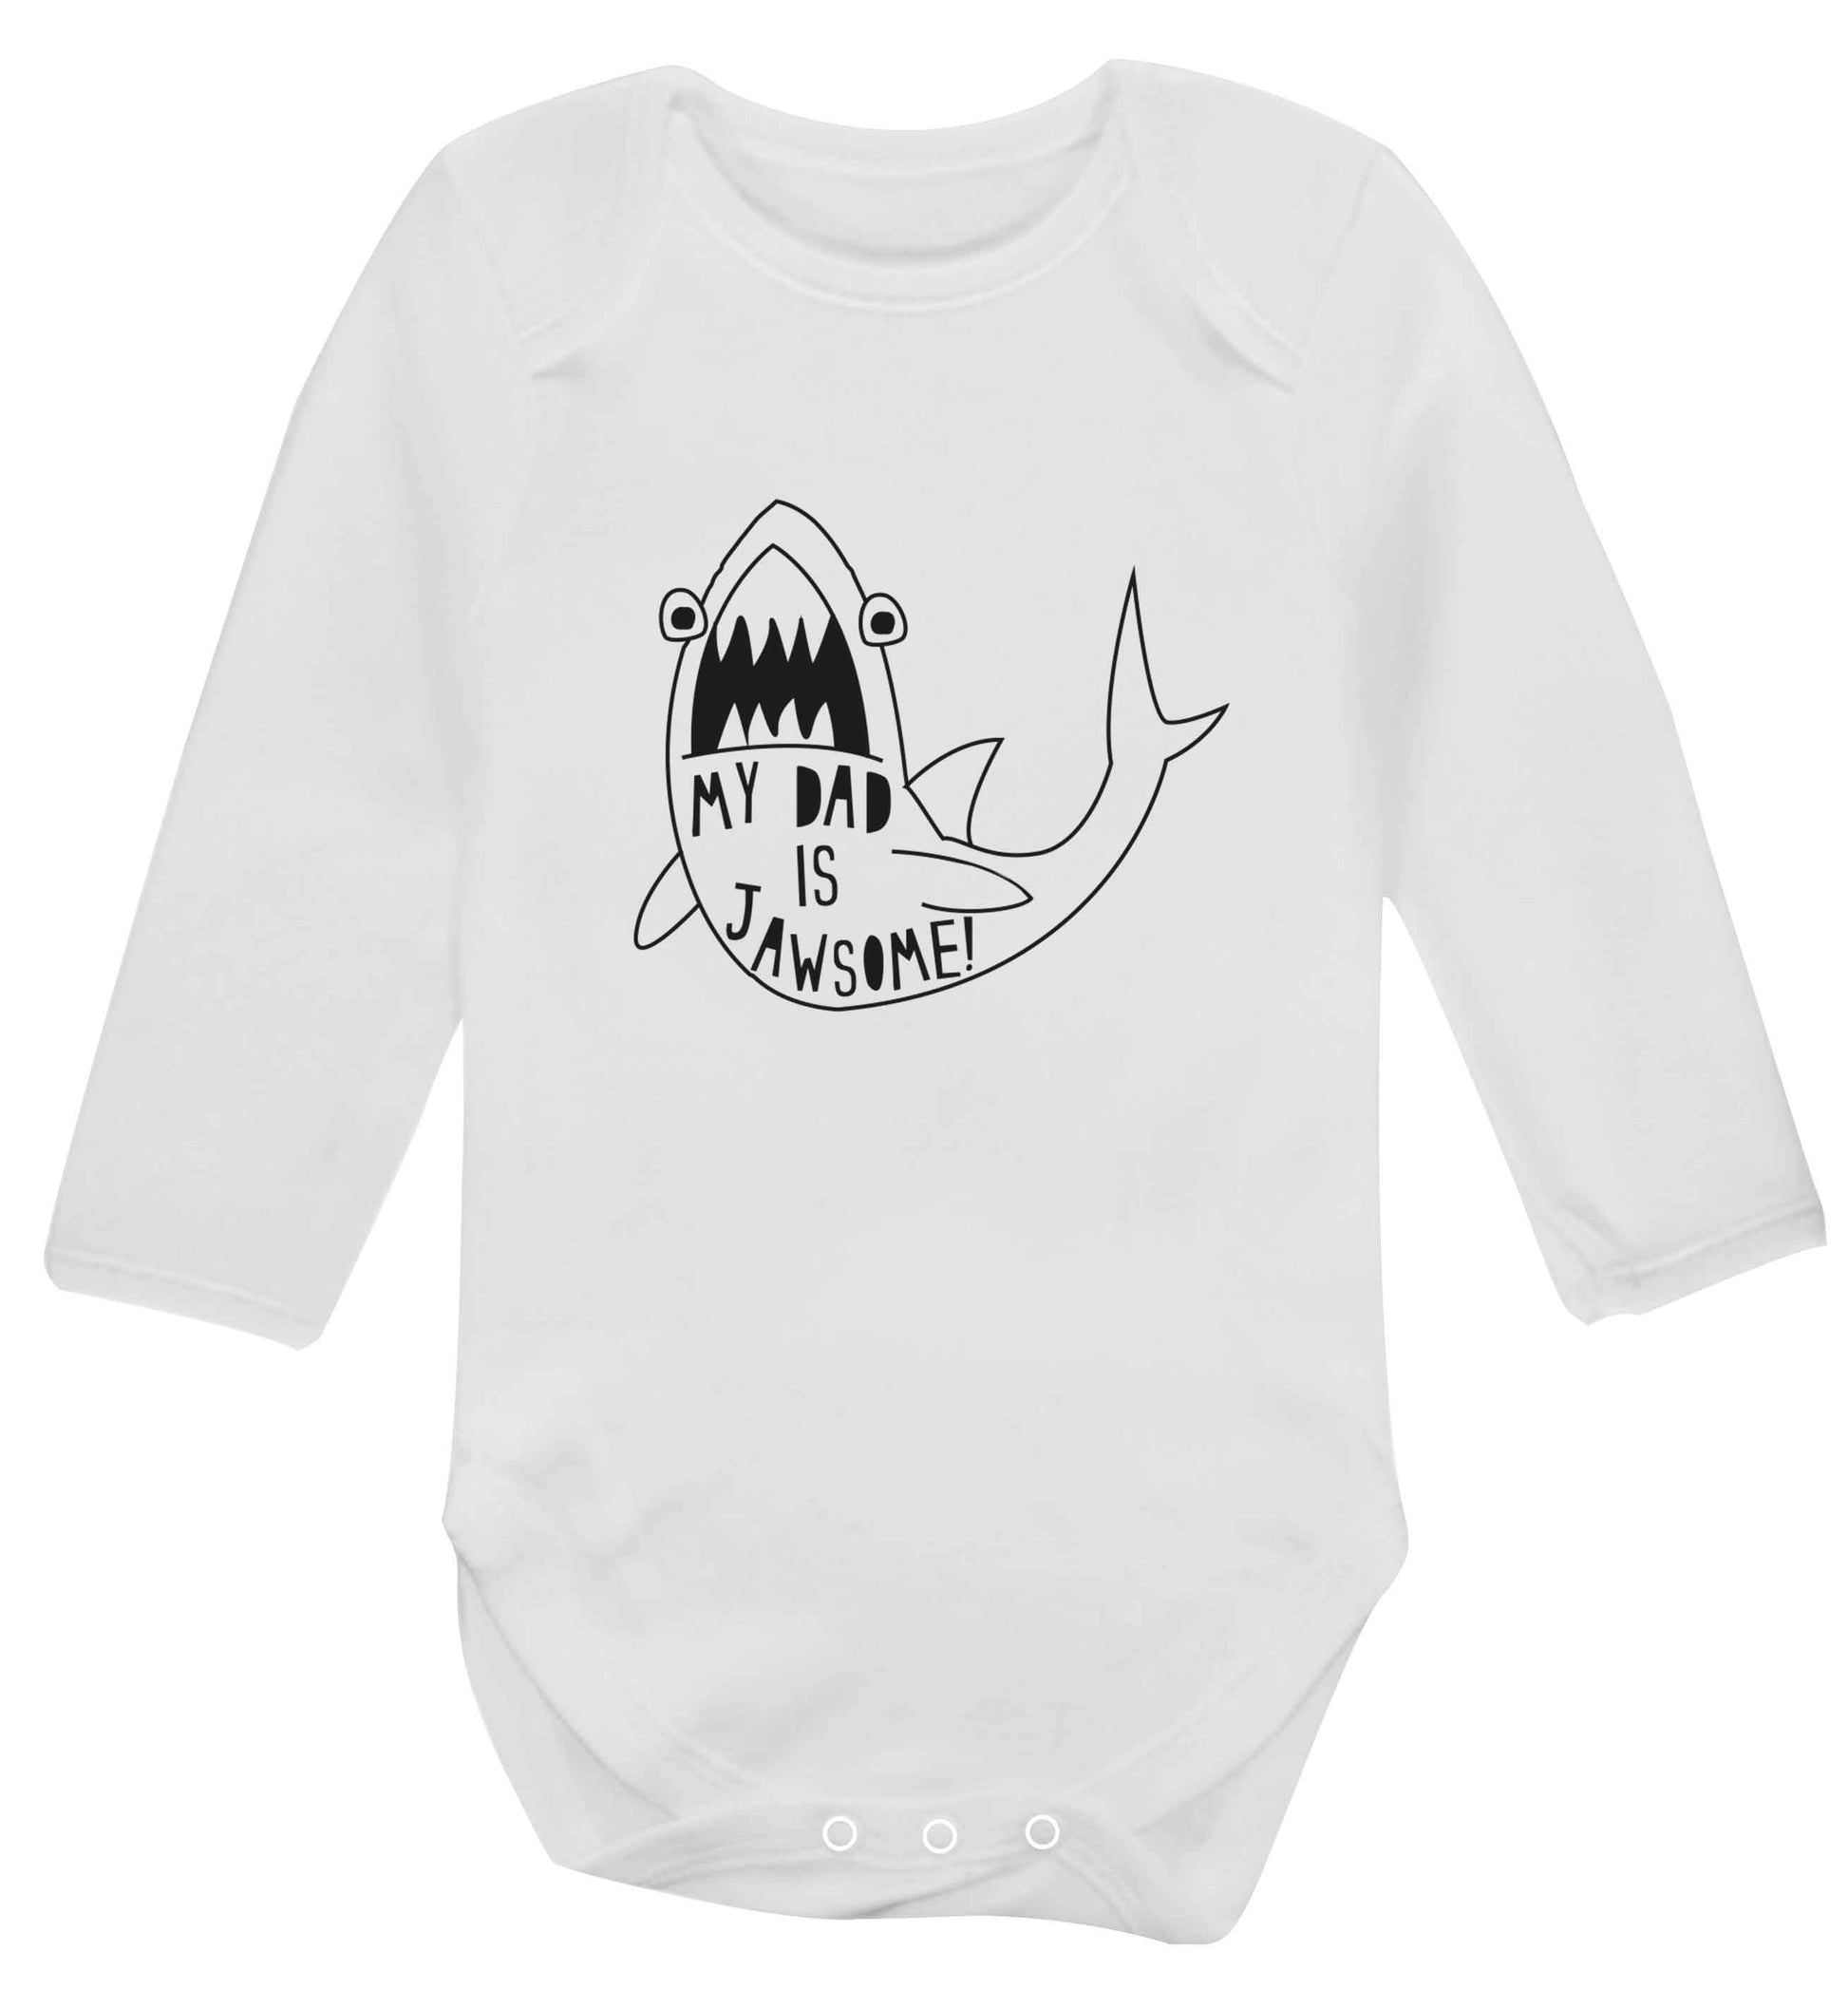 My Dad is jawsome baby vest long sleeved white 6-12 months